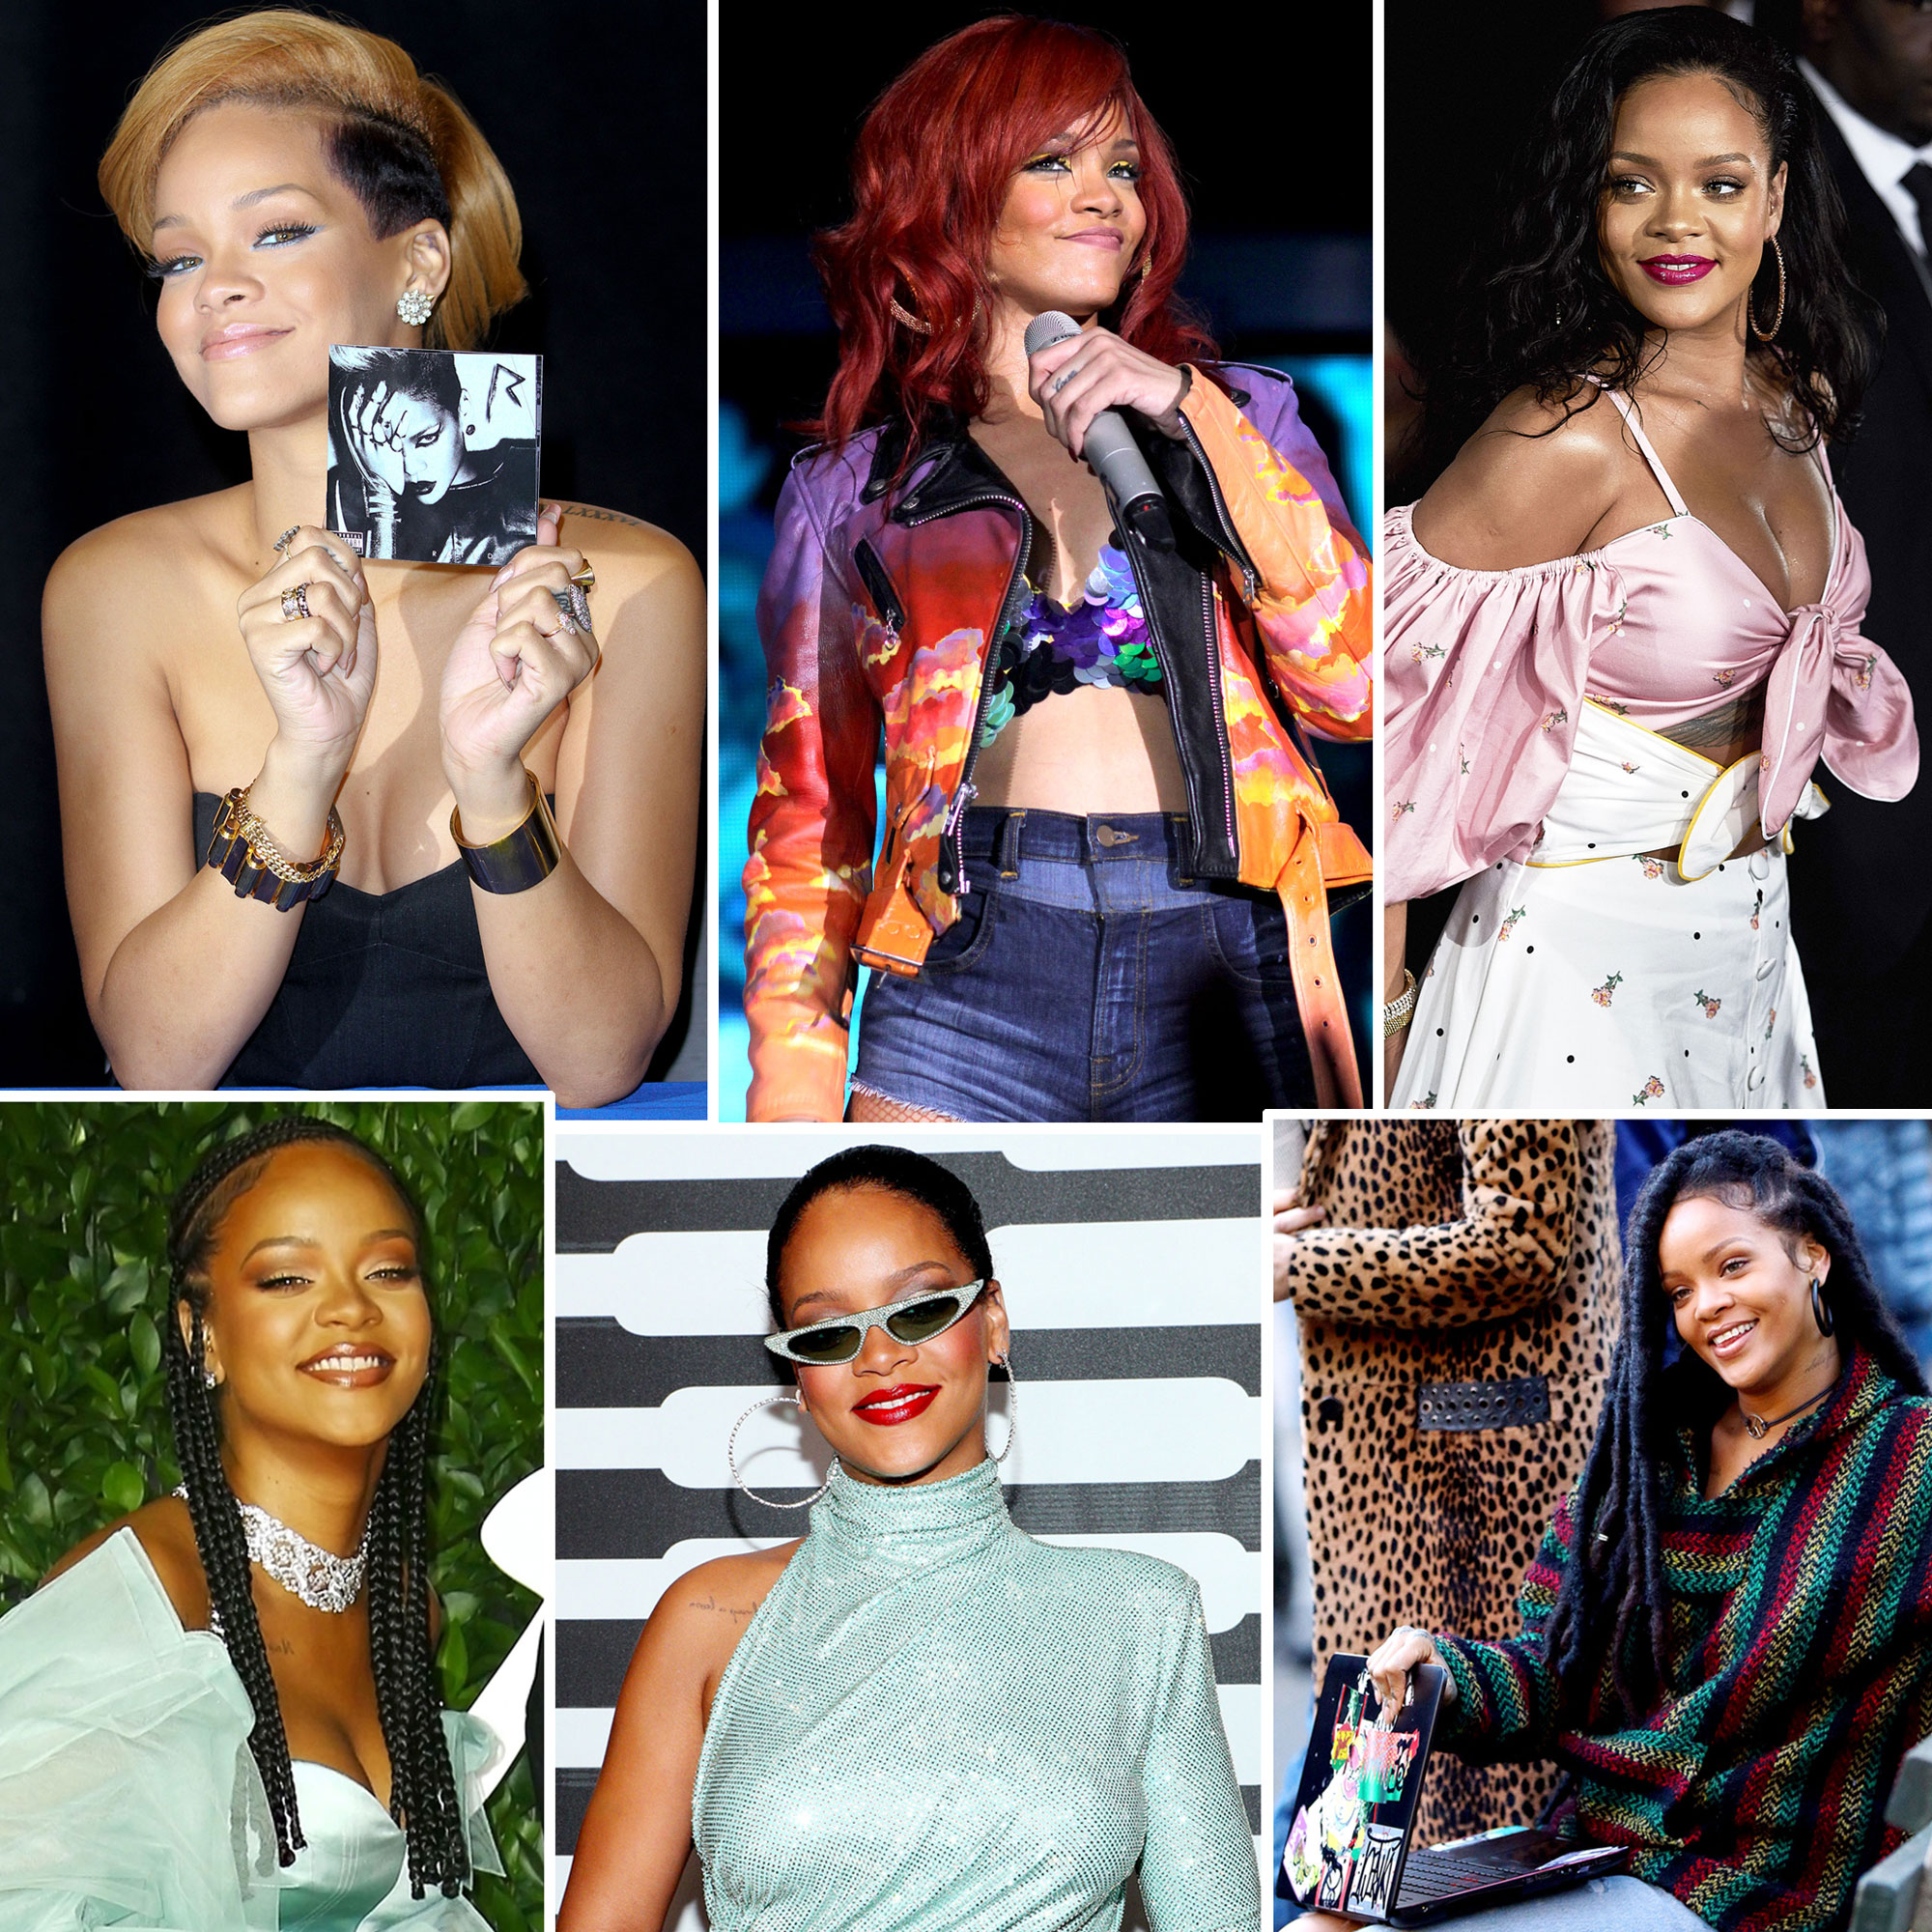 Rihanna's career timeline: From early days to new music